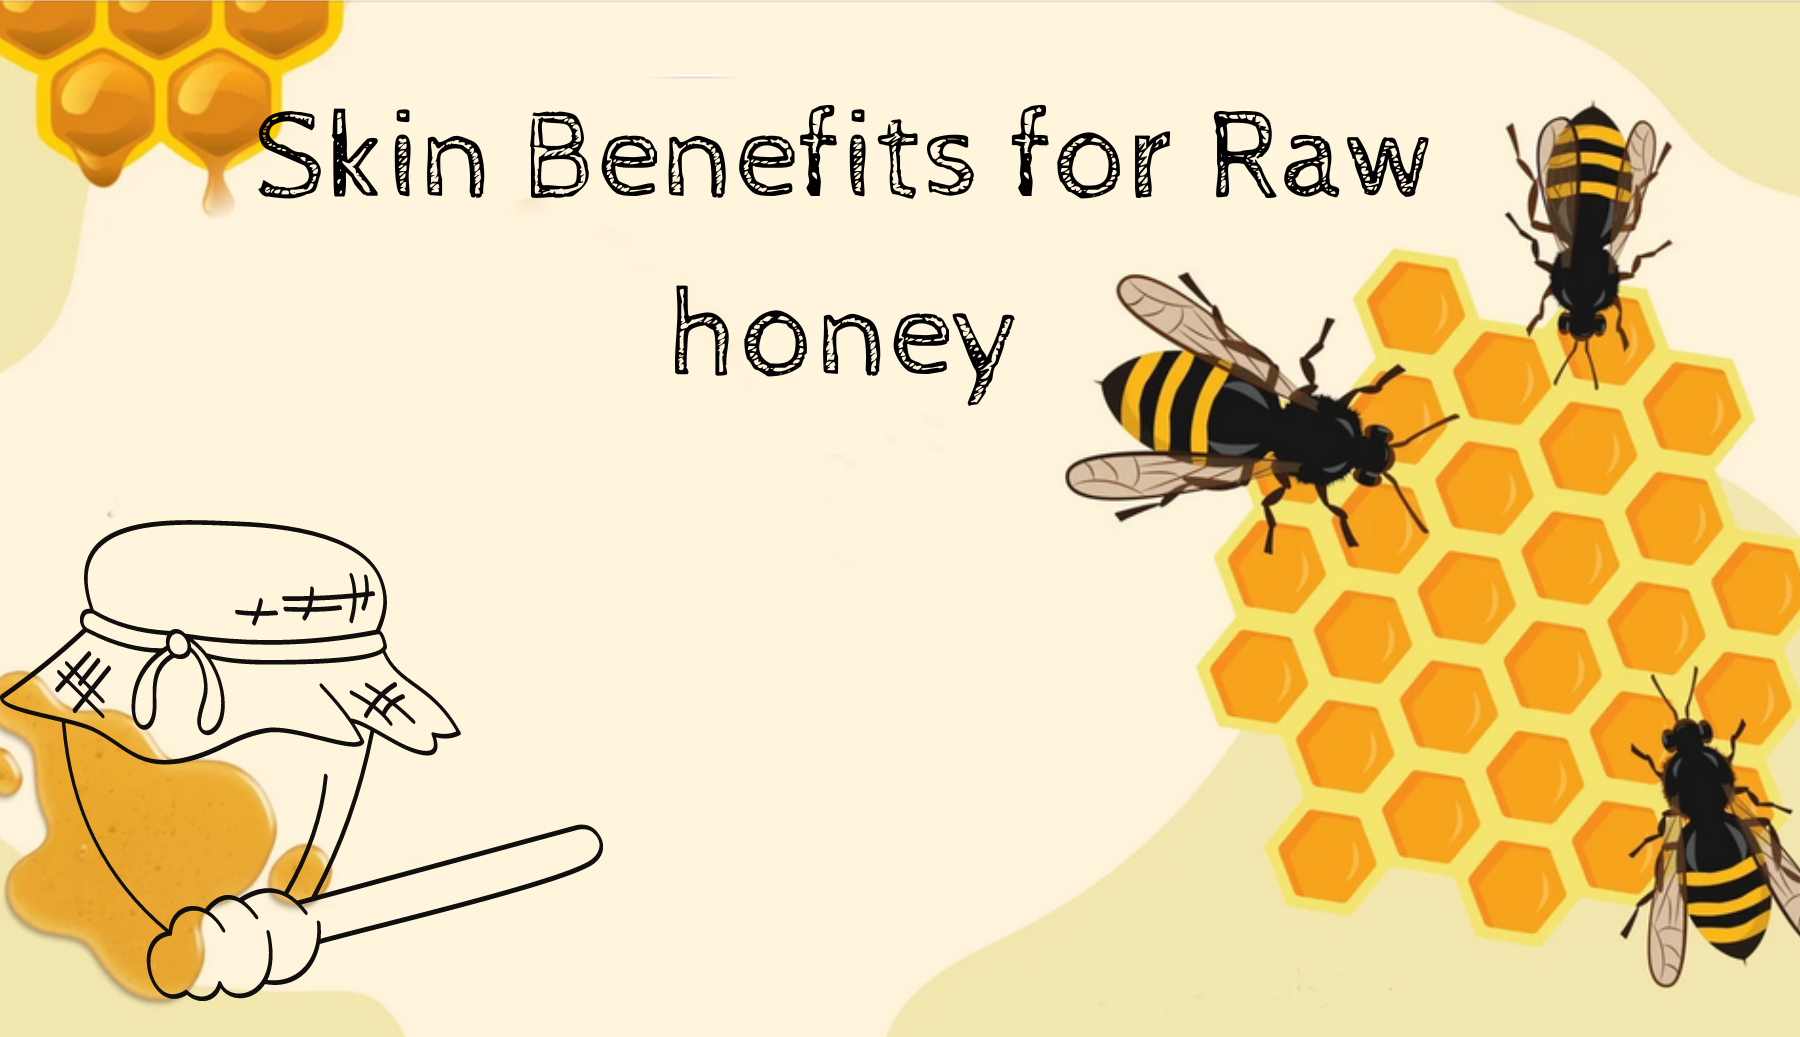 Raw Honey and its 6 essential Benefits